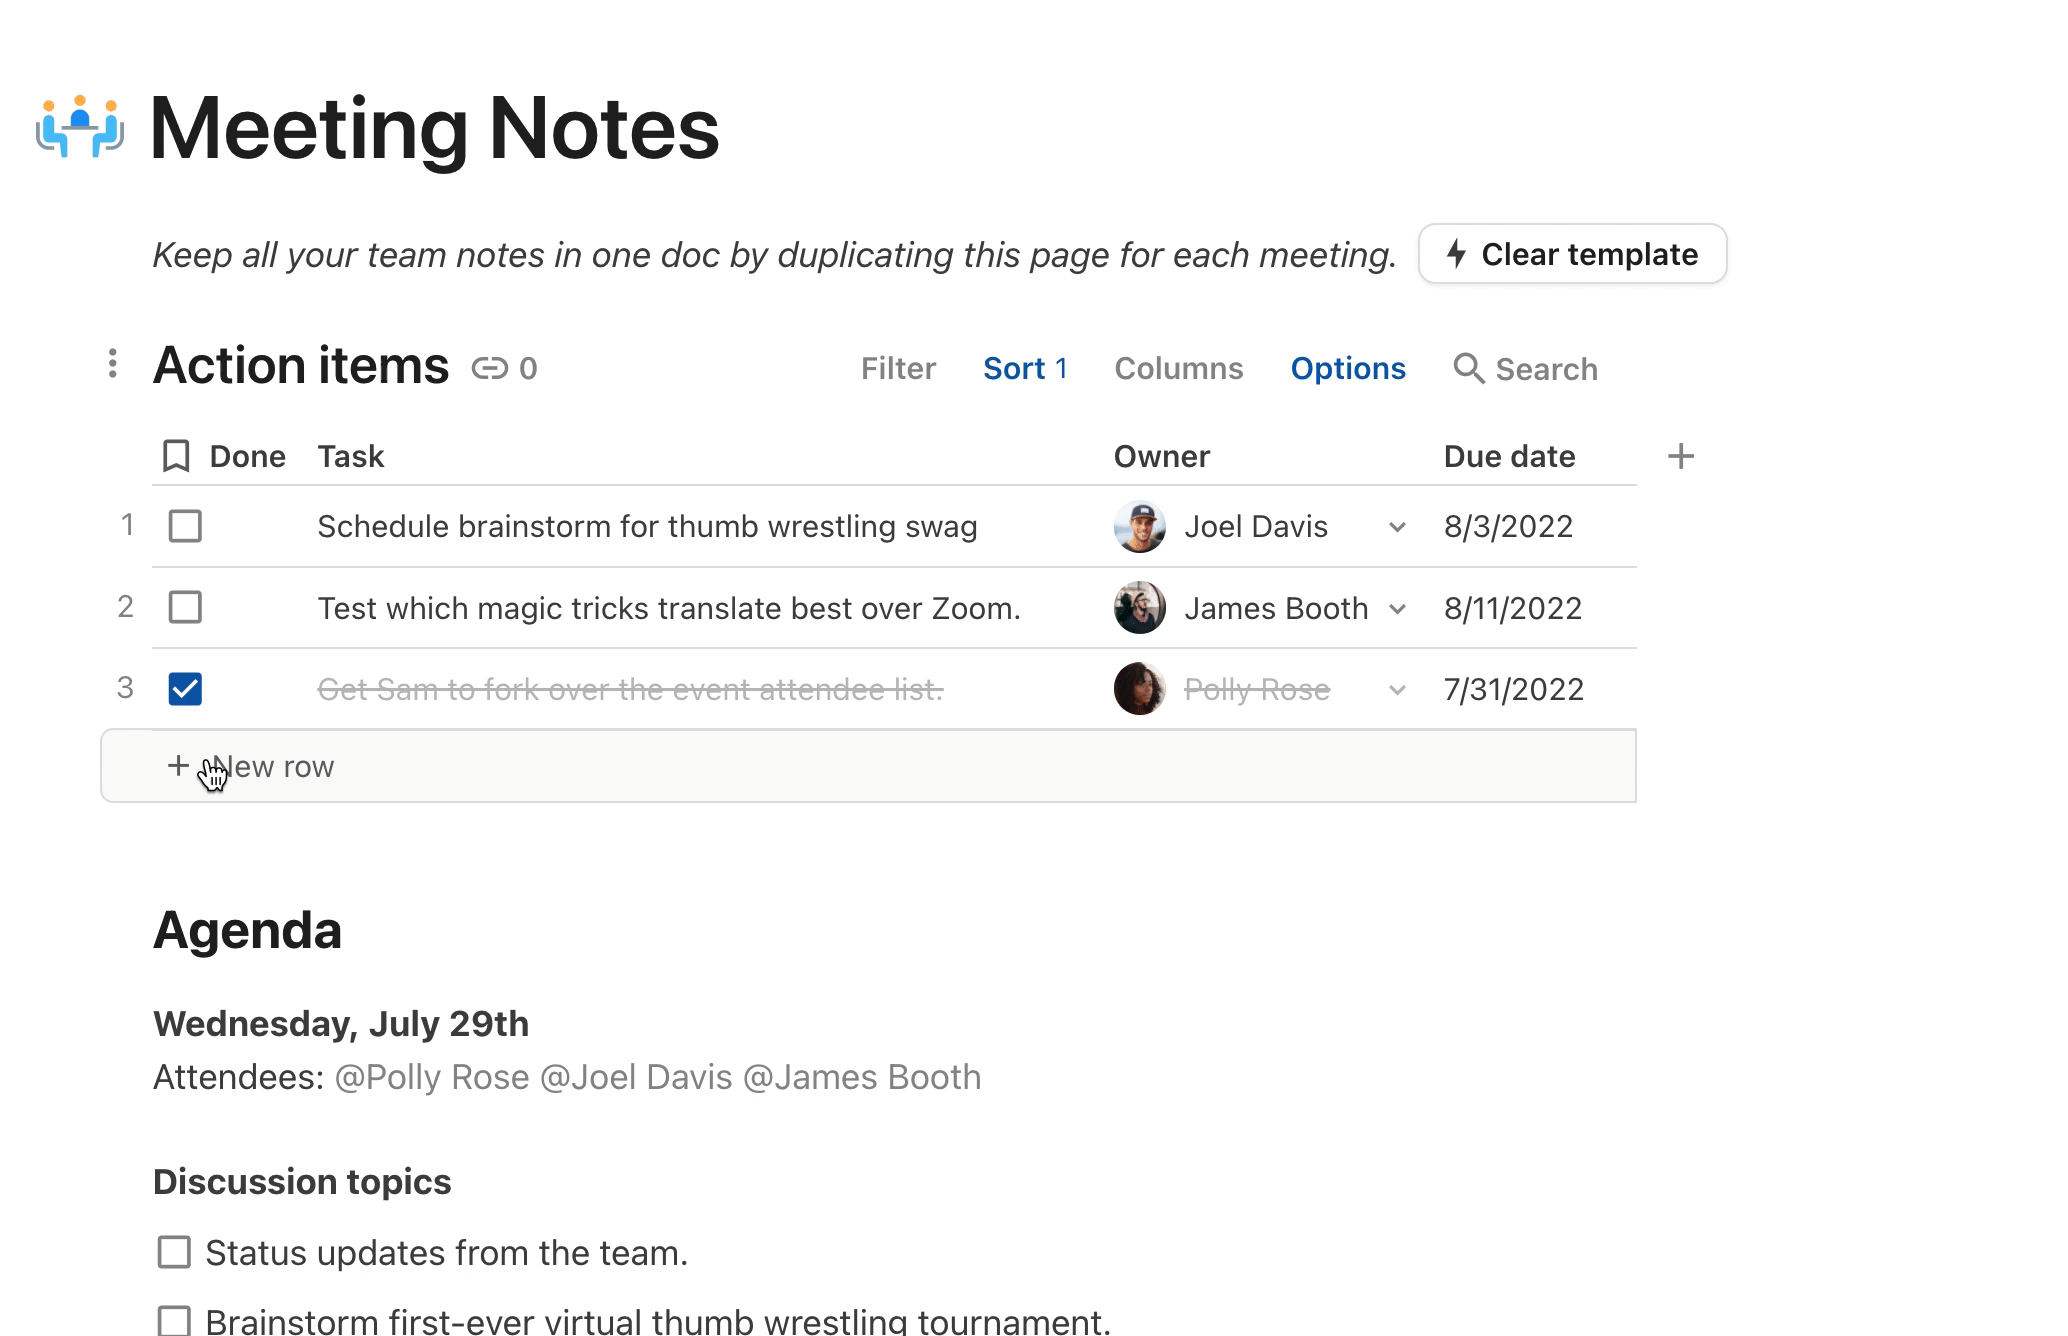 Simple meeting notes template - keep your team's meeting notes organized and accessible